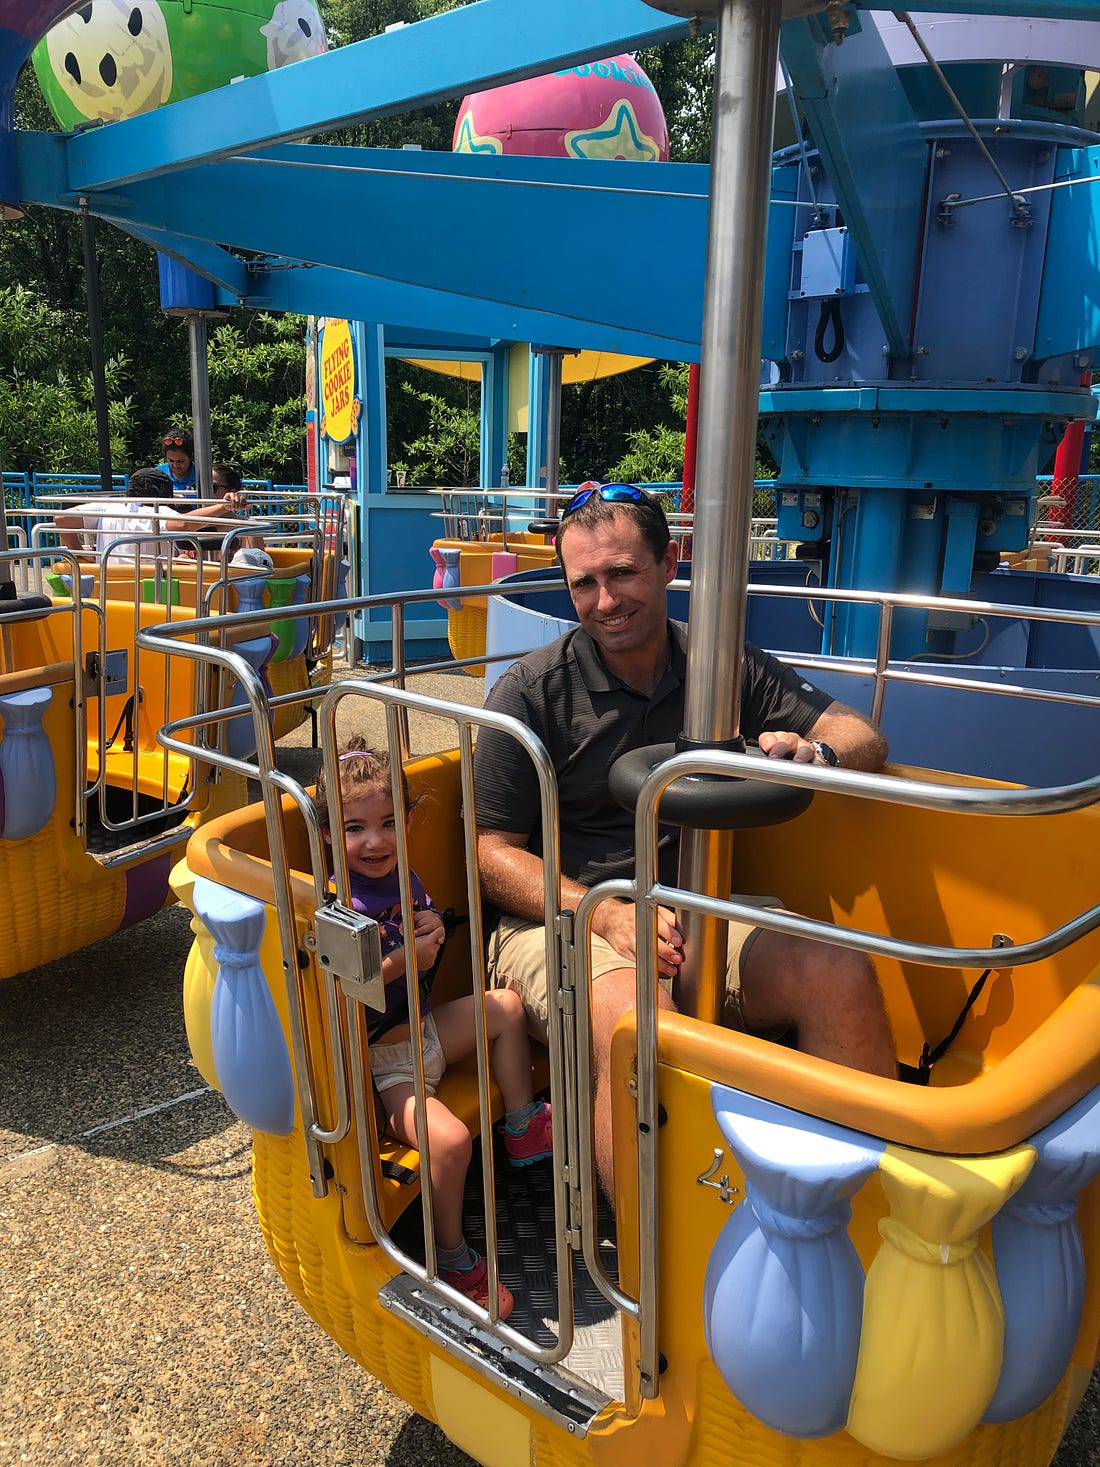 Photograph of Lila and Mark on a ride.  Lila is smiling.